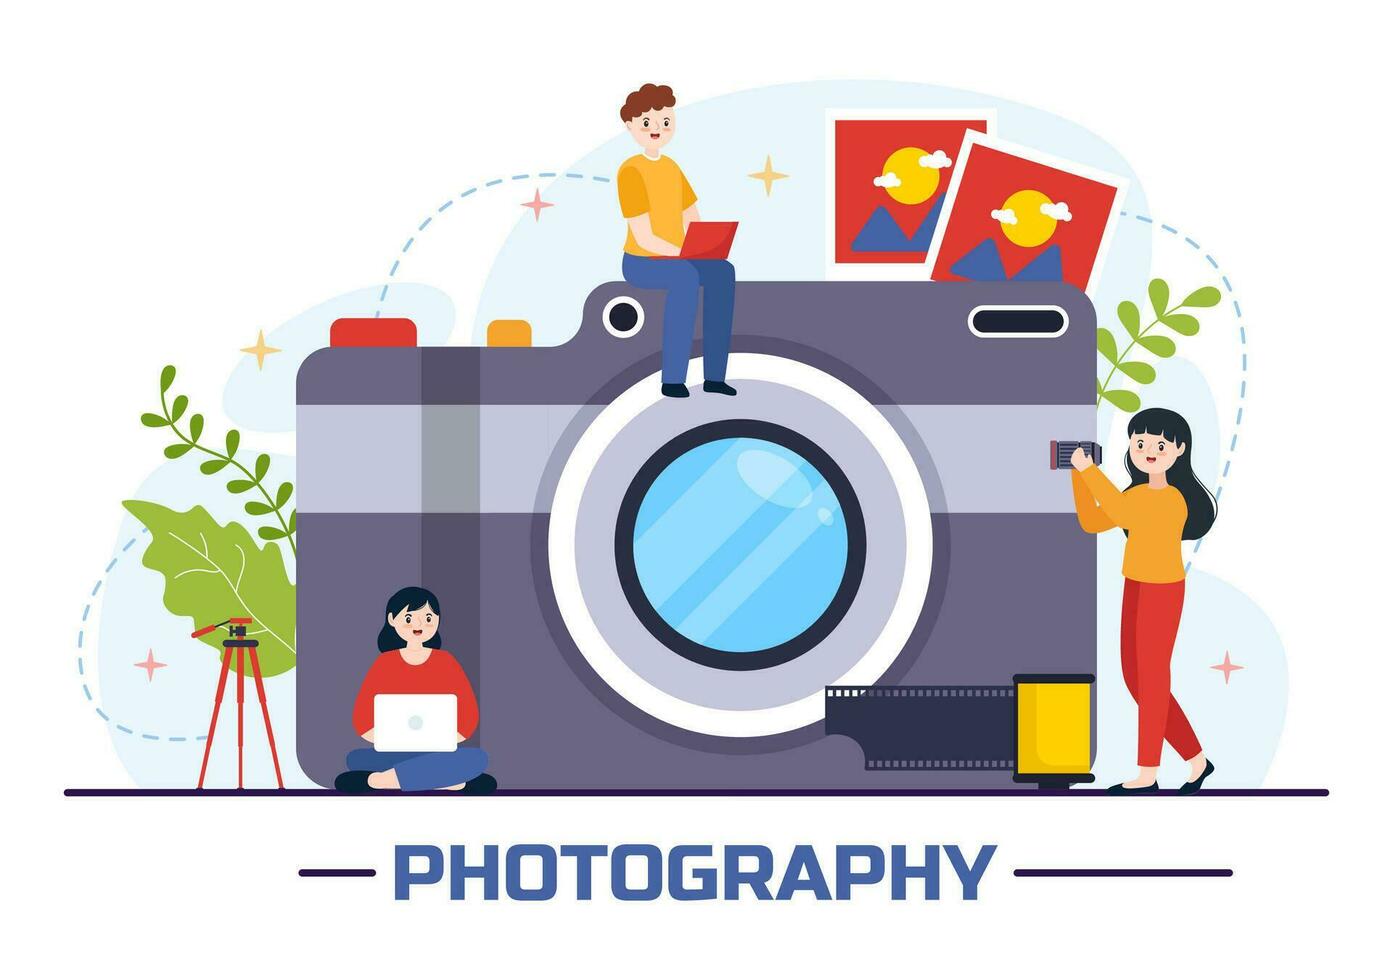 Photography Vector Illustration with Camera and Equipment to Capture Travel, Tourism, Adventure and Memories in a Flat Cartoon Background Design